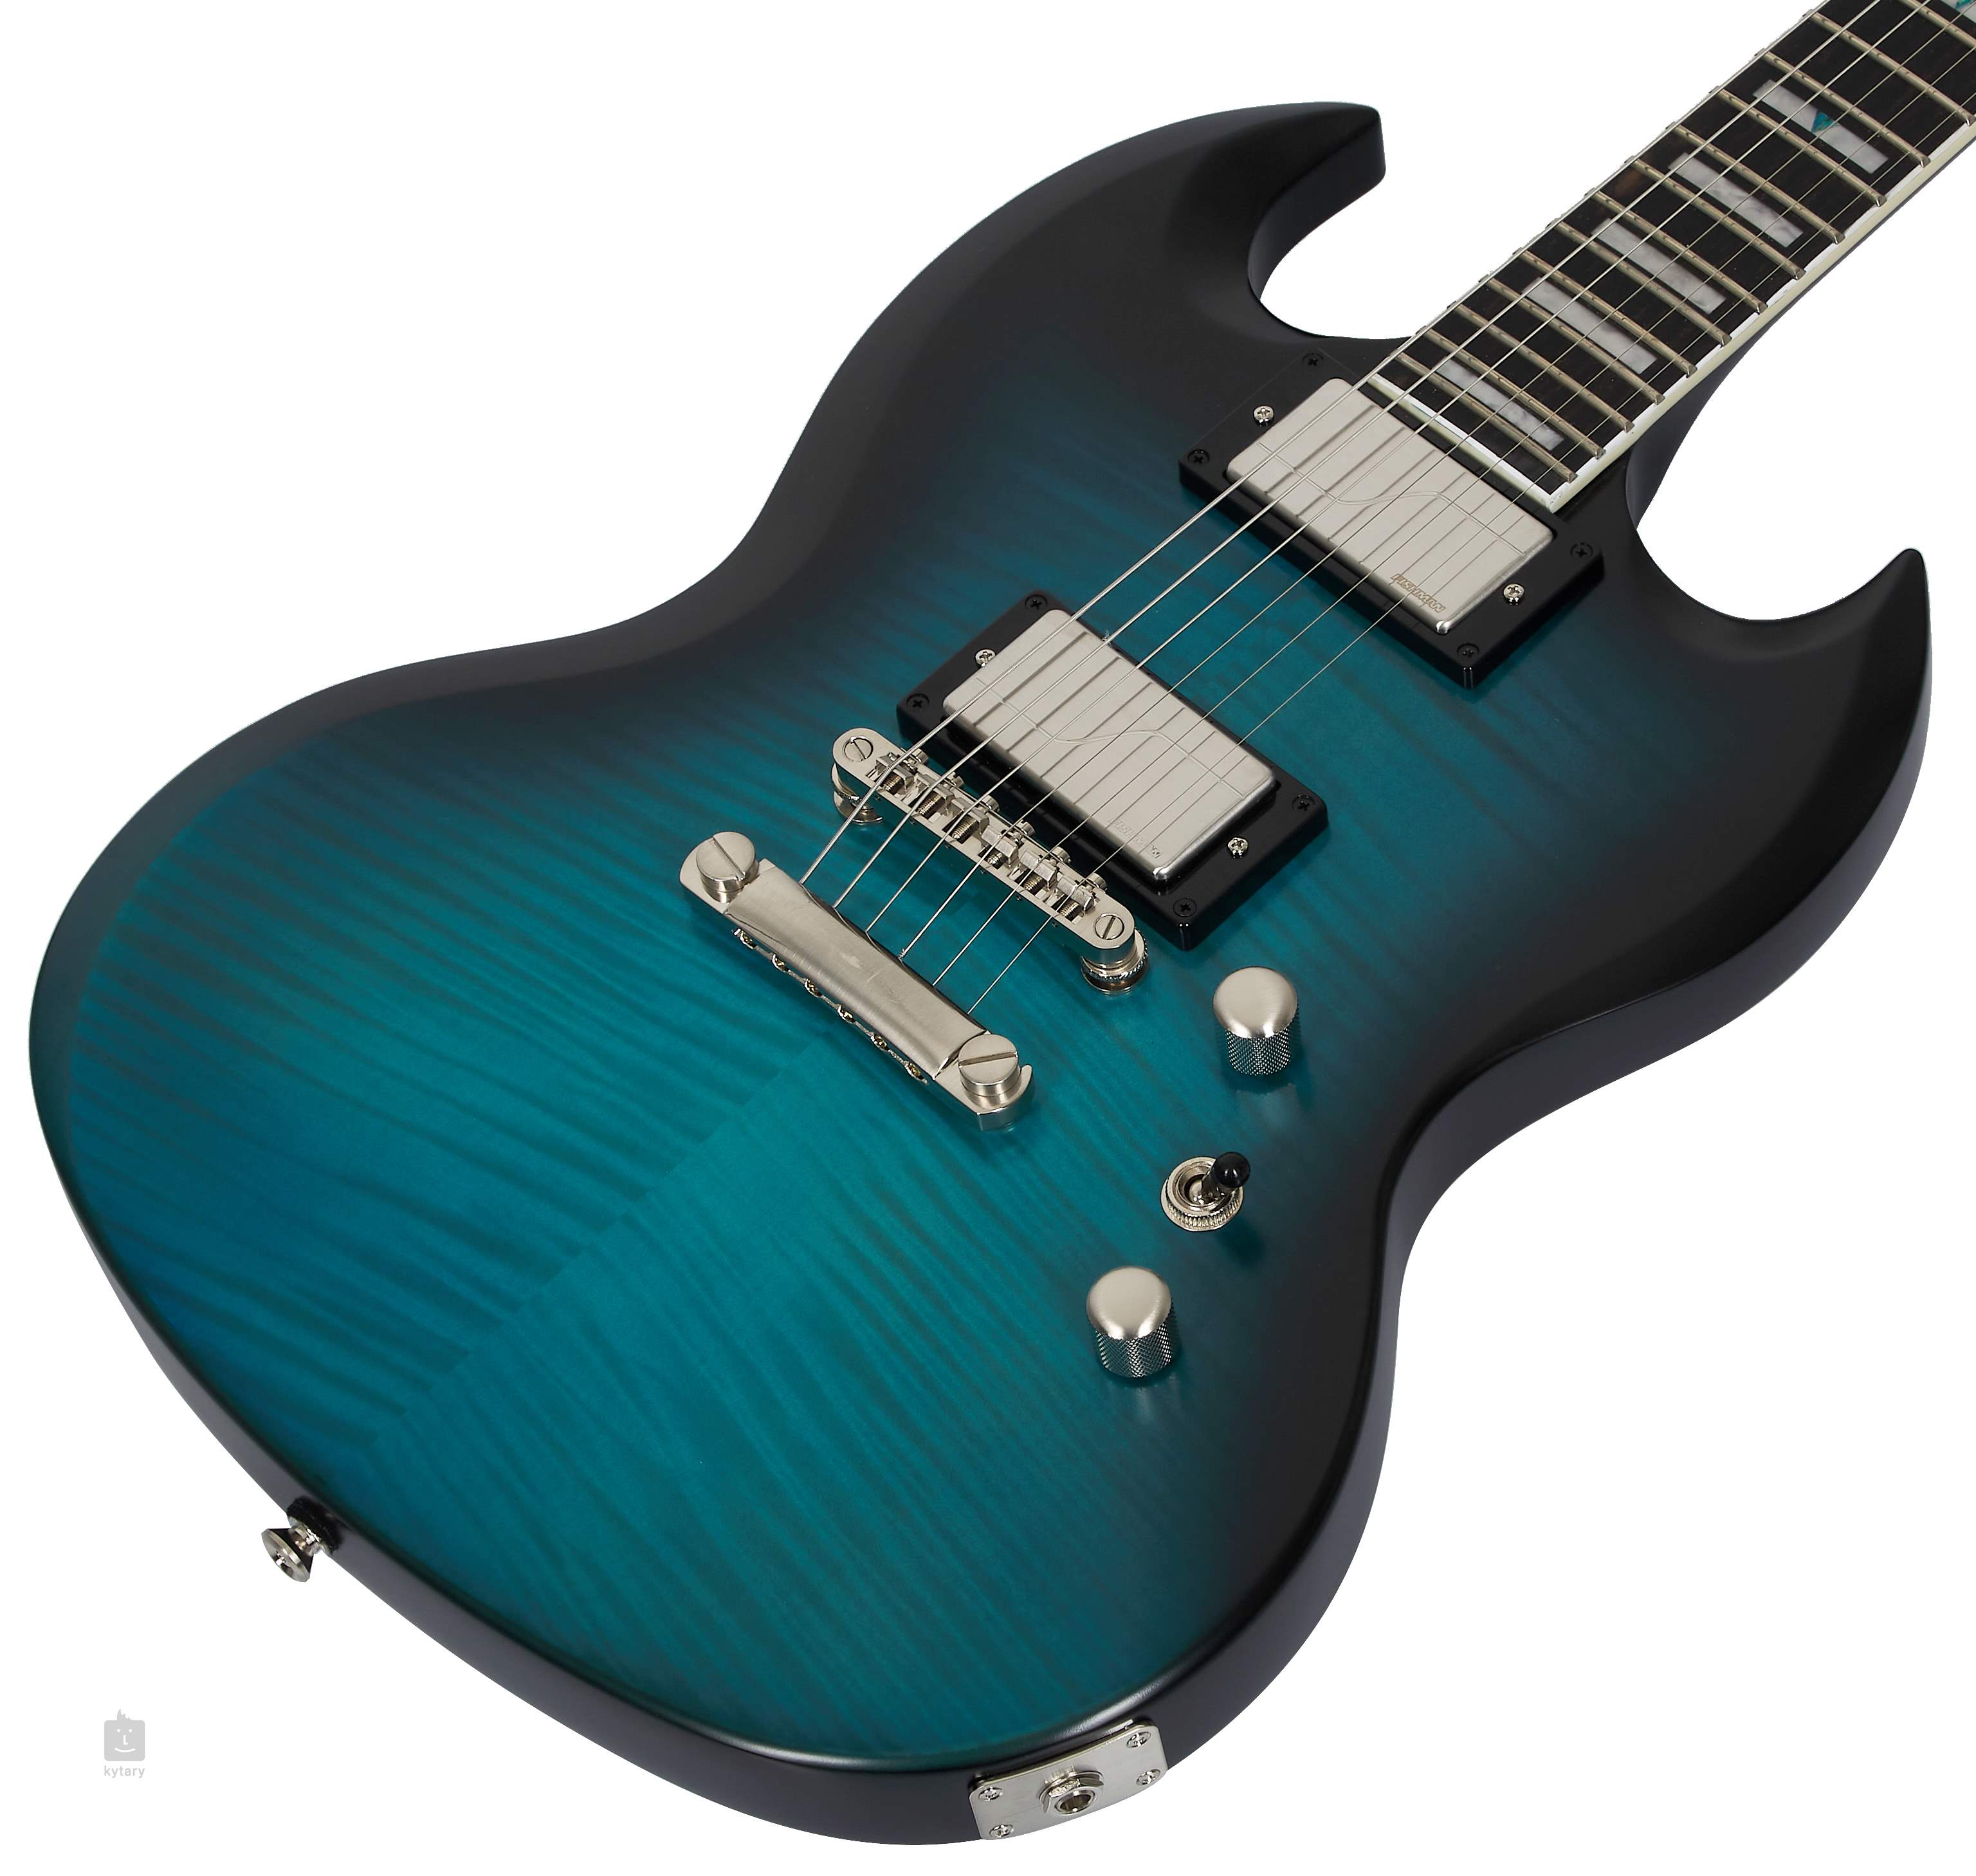 EPIPHONE SG Prophecy Blue Tiger Aged Gloss